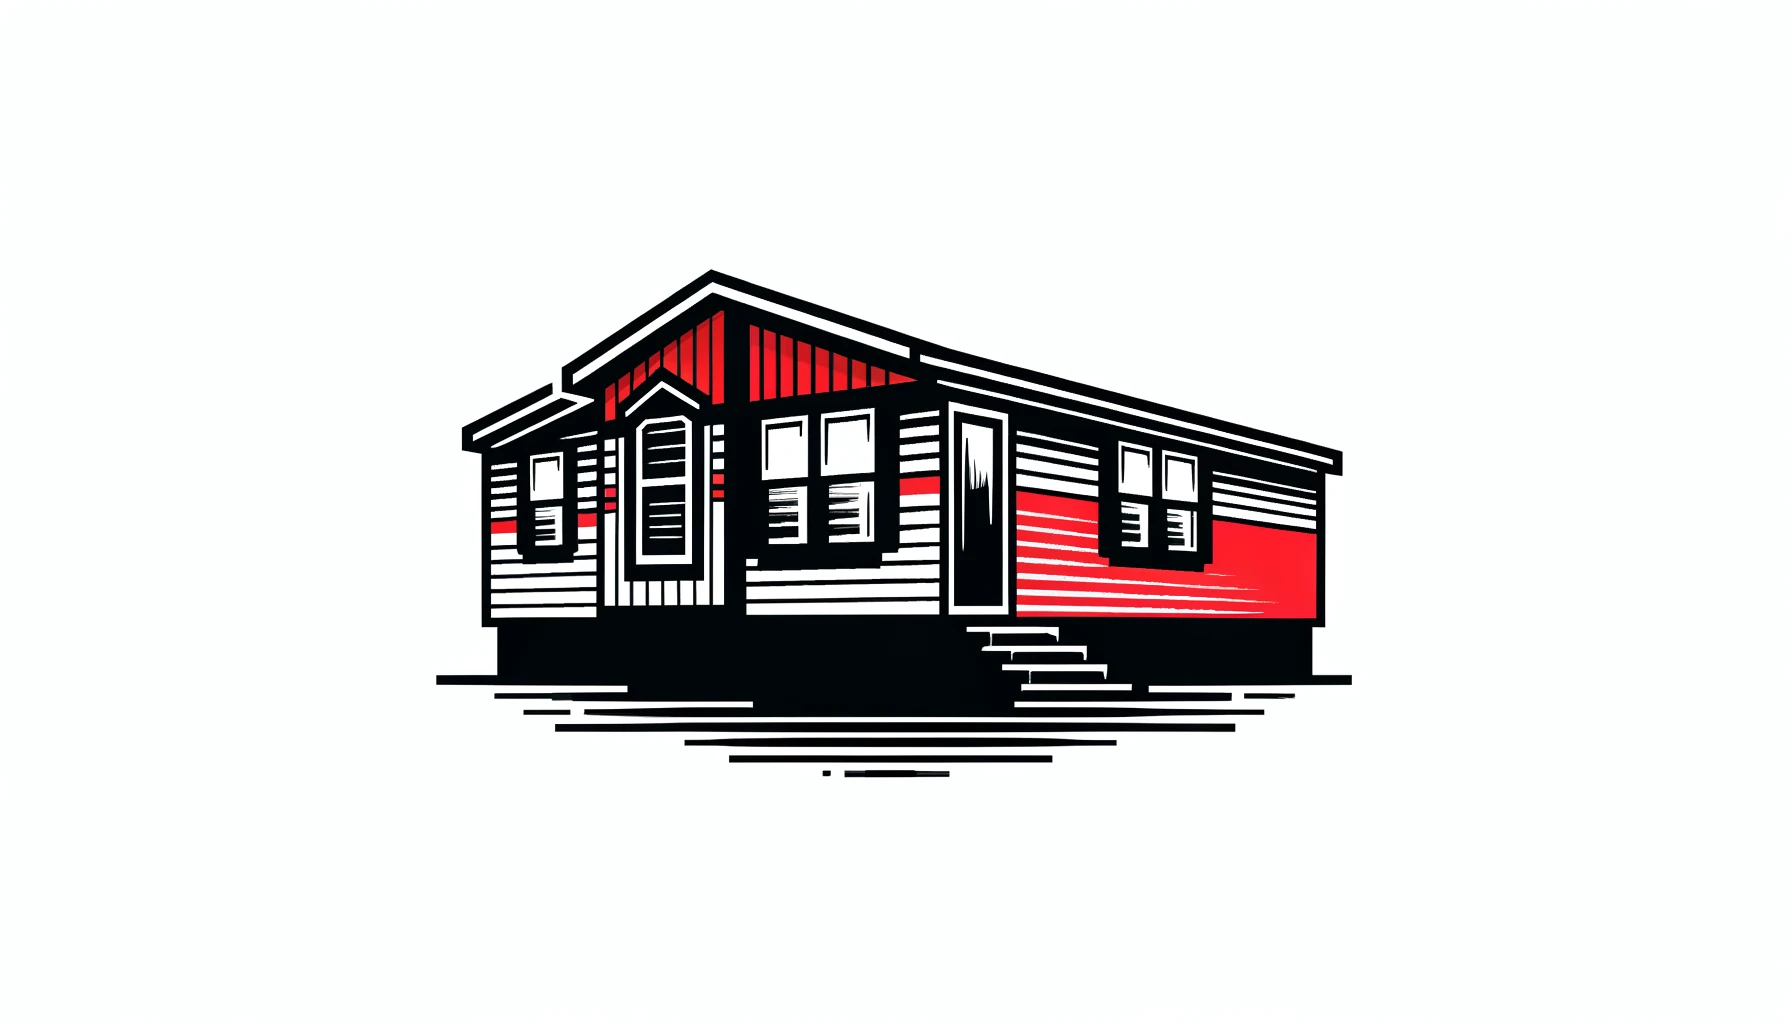 Illustration of a manufactured home with bold black outlines and bright red stripes on a white background.